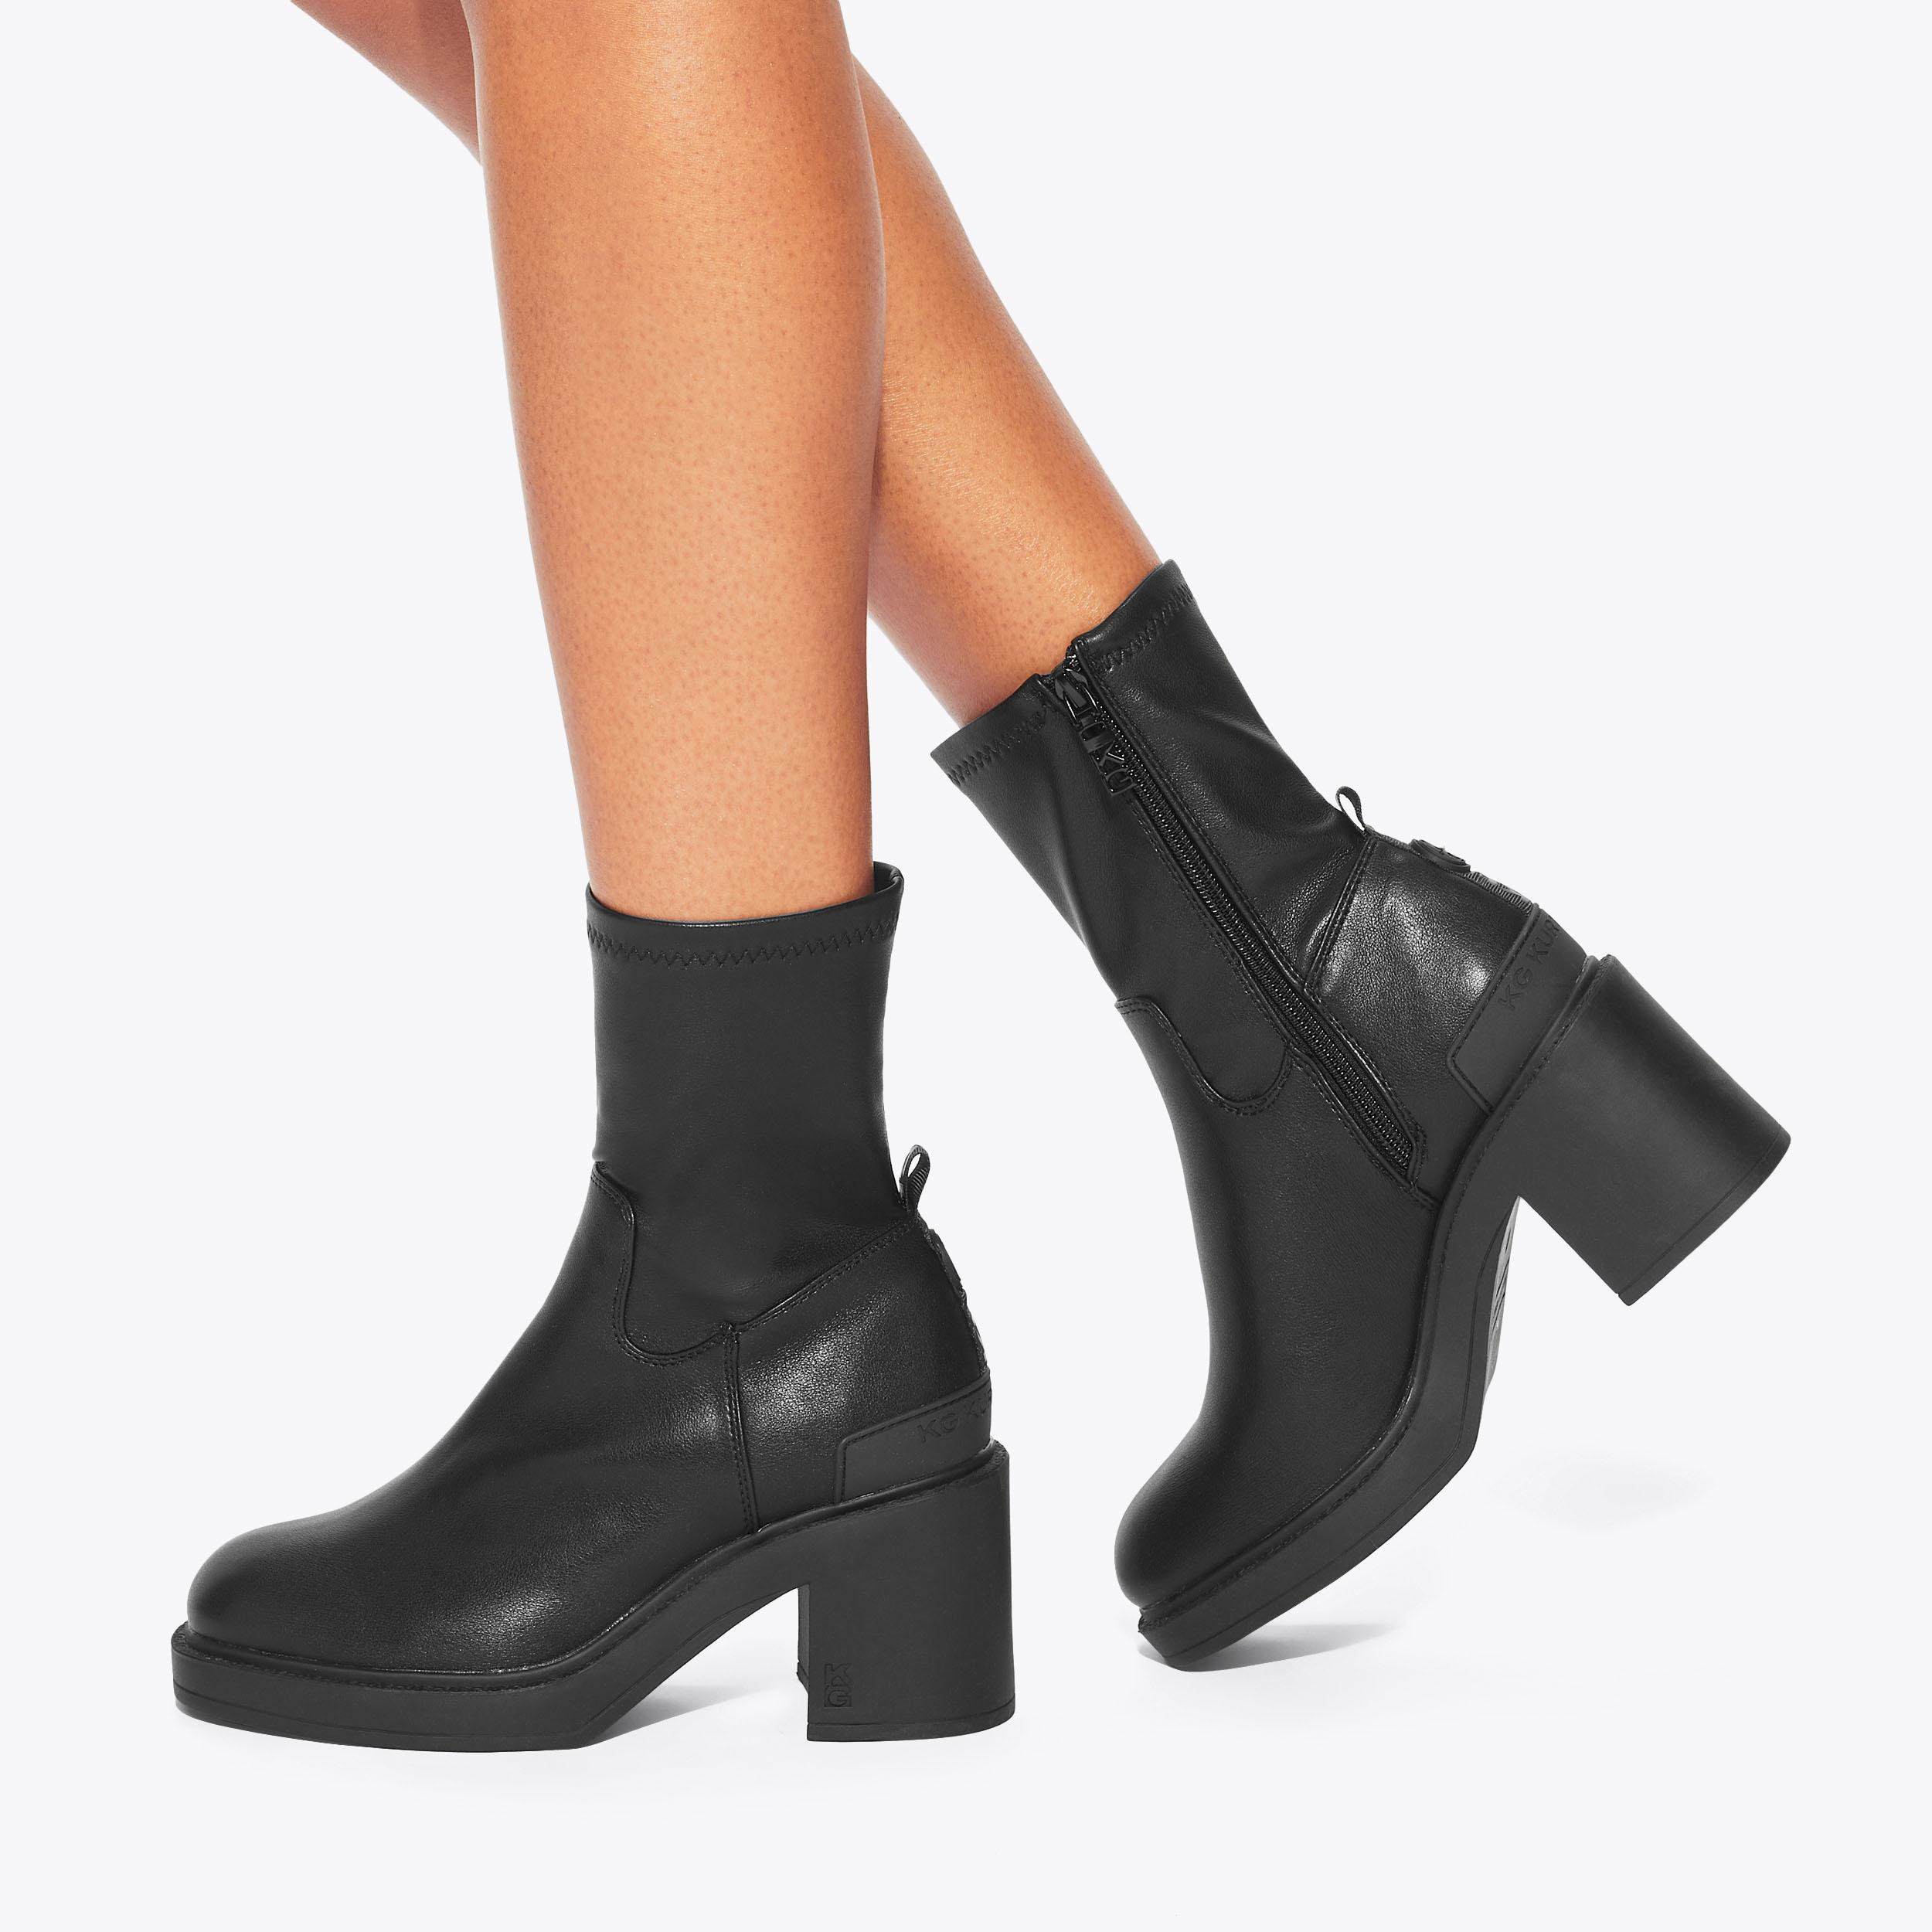 TATE Black Ankle Boots by KG KURT GEIGER